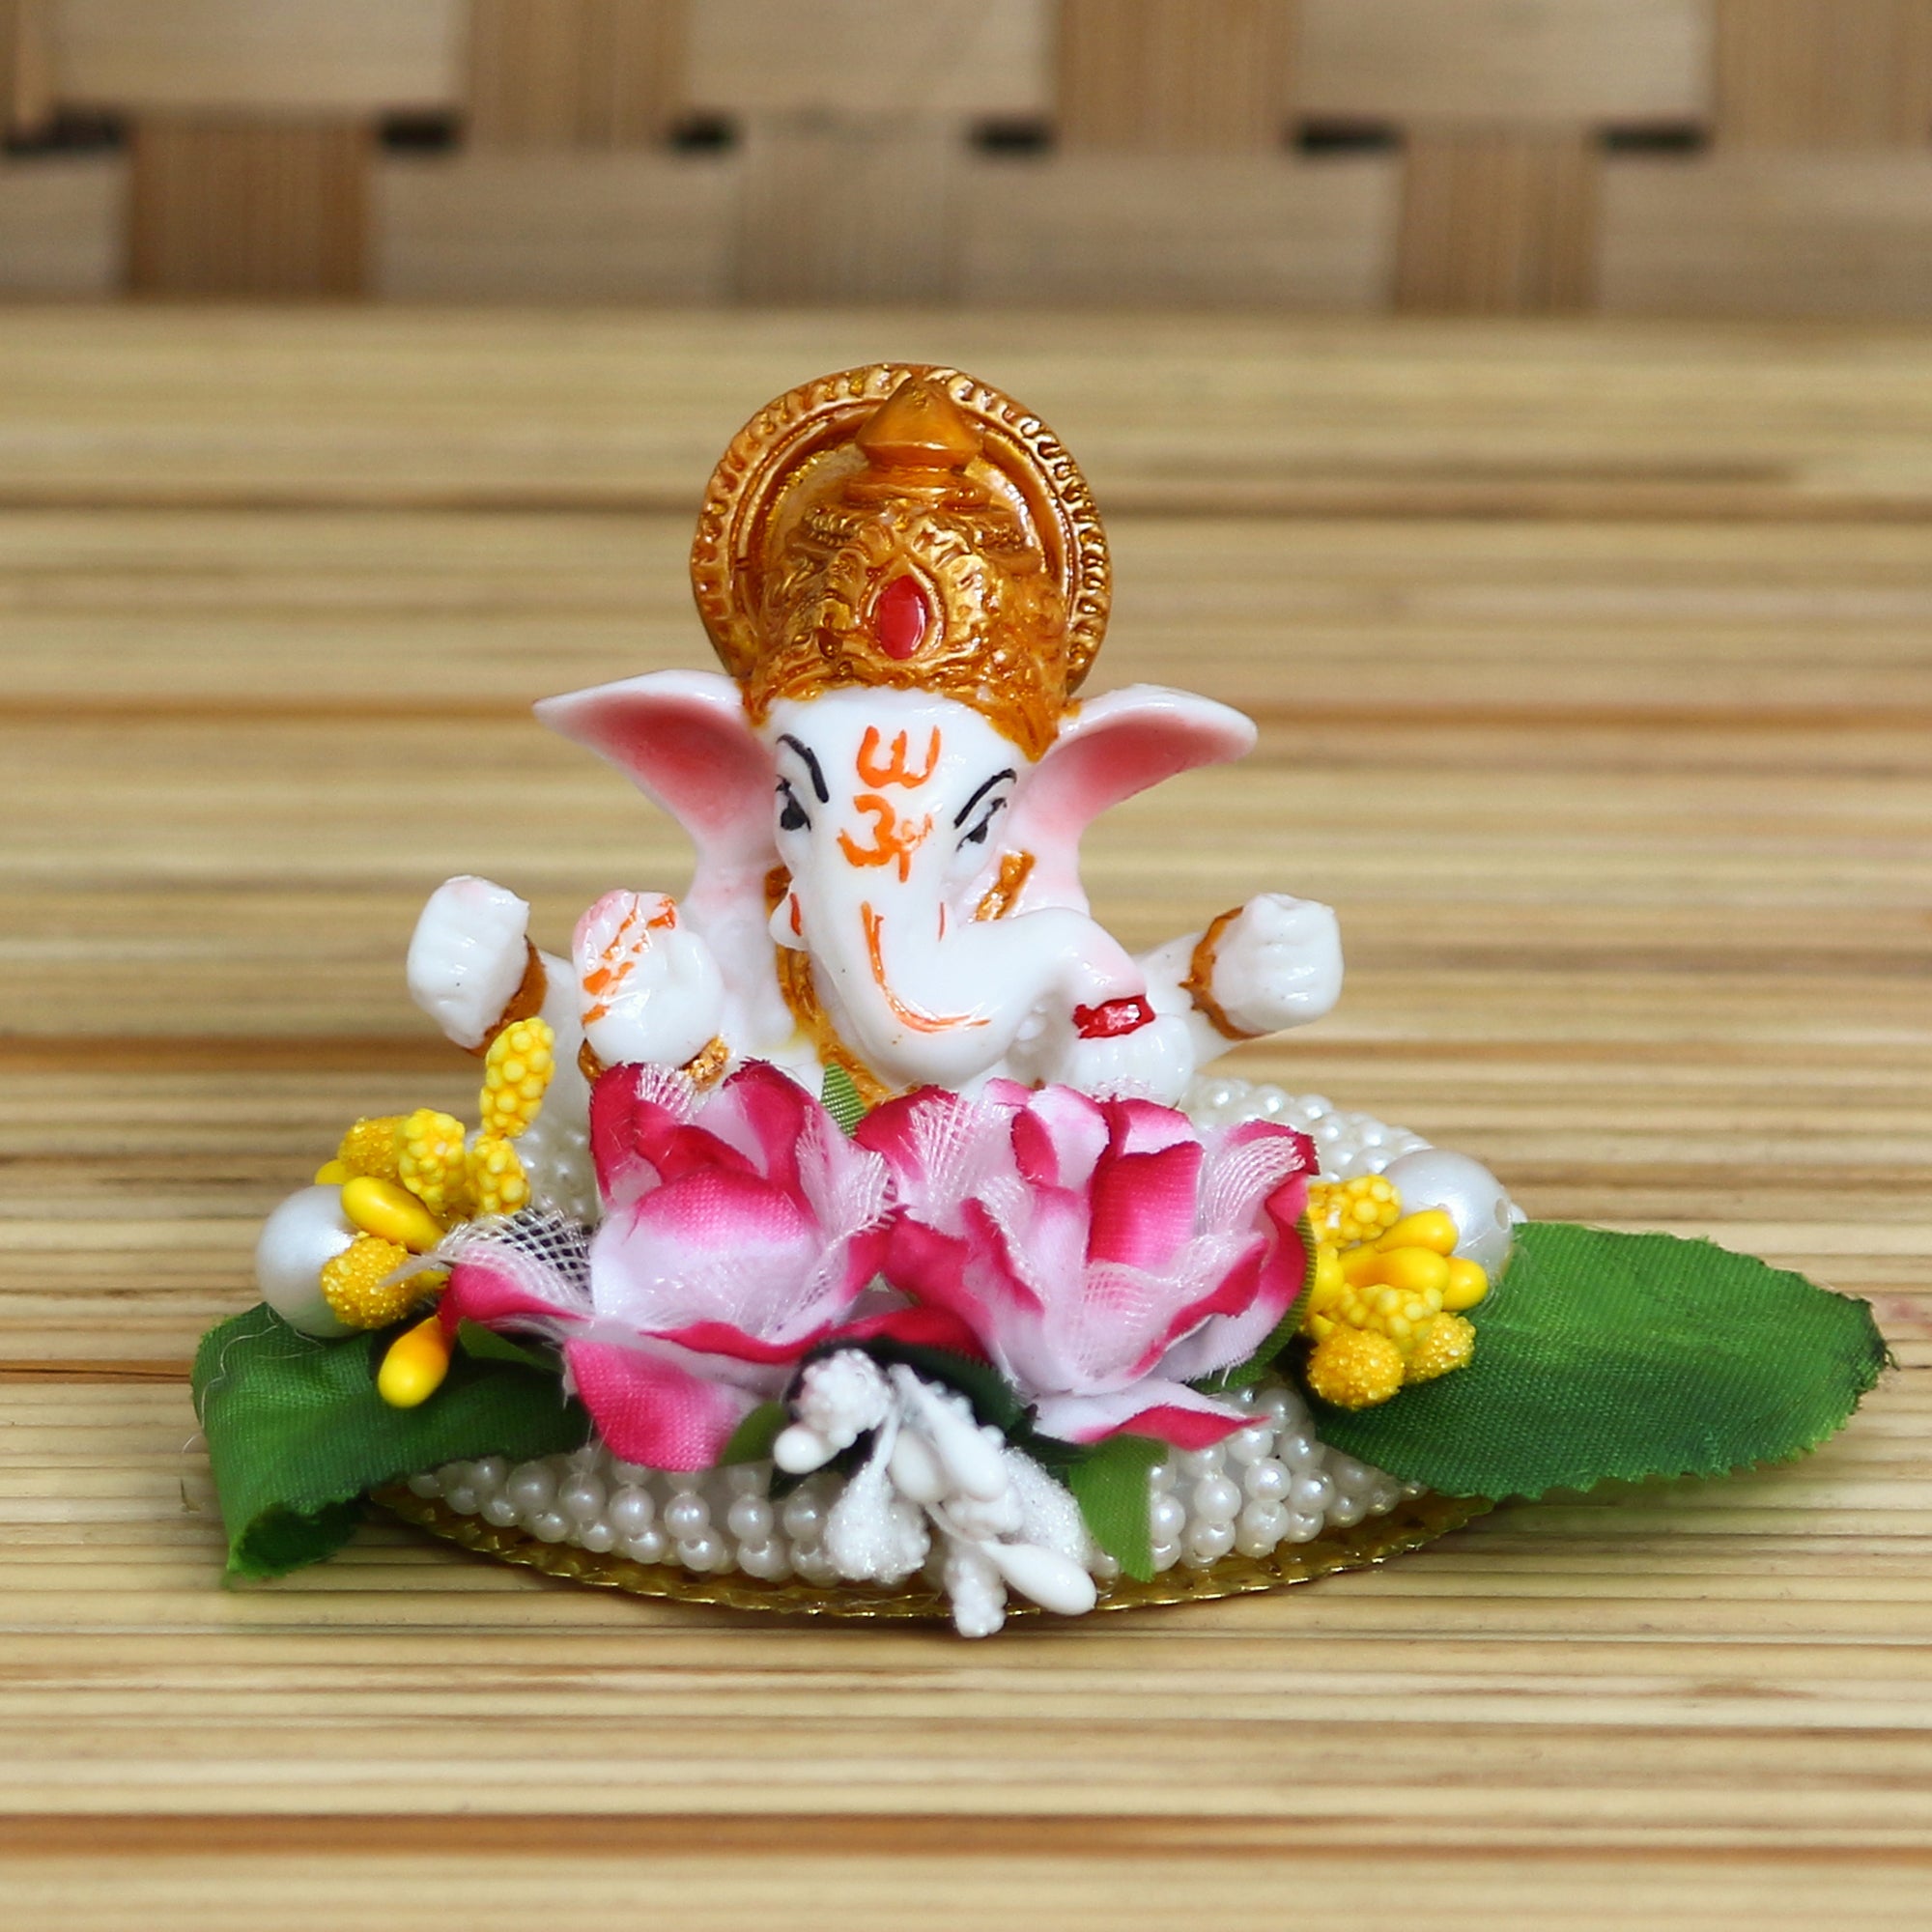 Lord Ganesha Idol on Decorative Handcrafted Plate with Colorful Flowers and Leaf